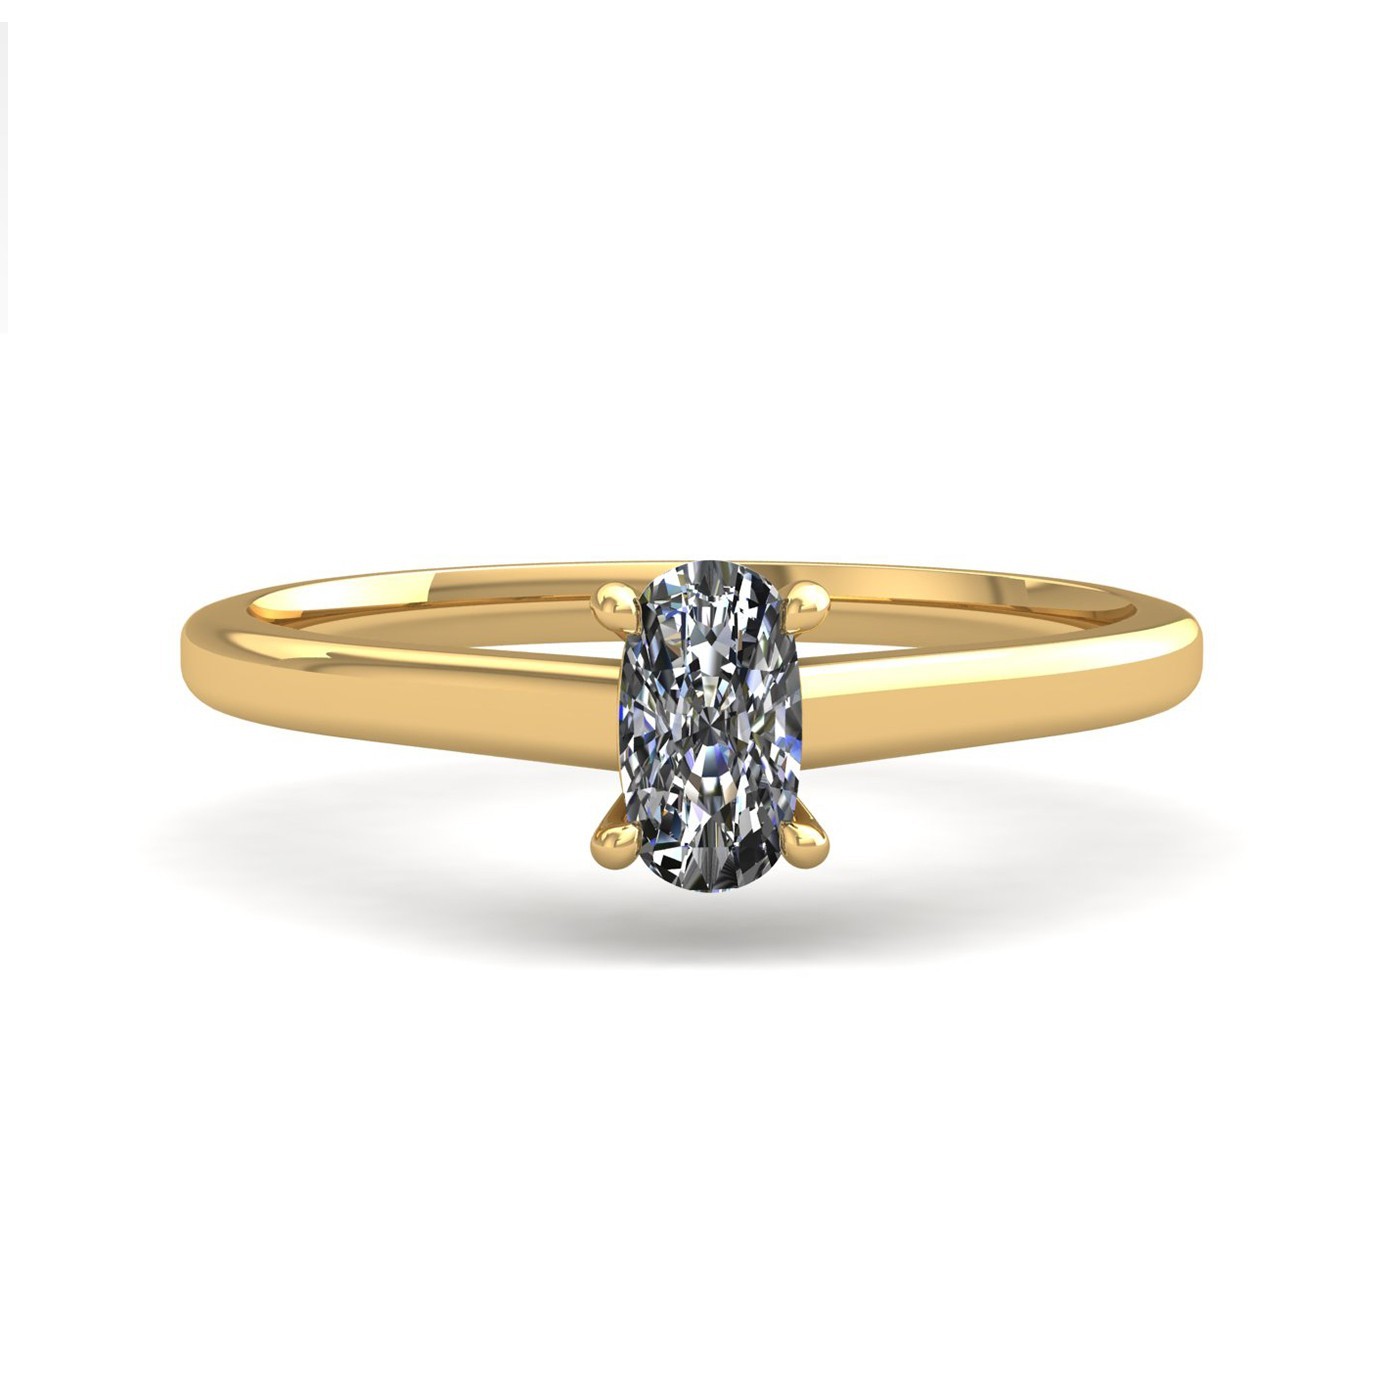 18k yellow gold 1,00 ct 4 prongs solitaire elongated cushion cut diamond engagement ring with whisper thin band Photos & images